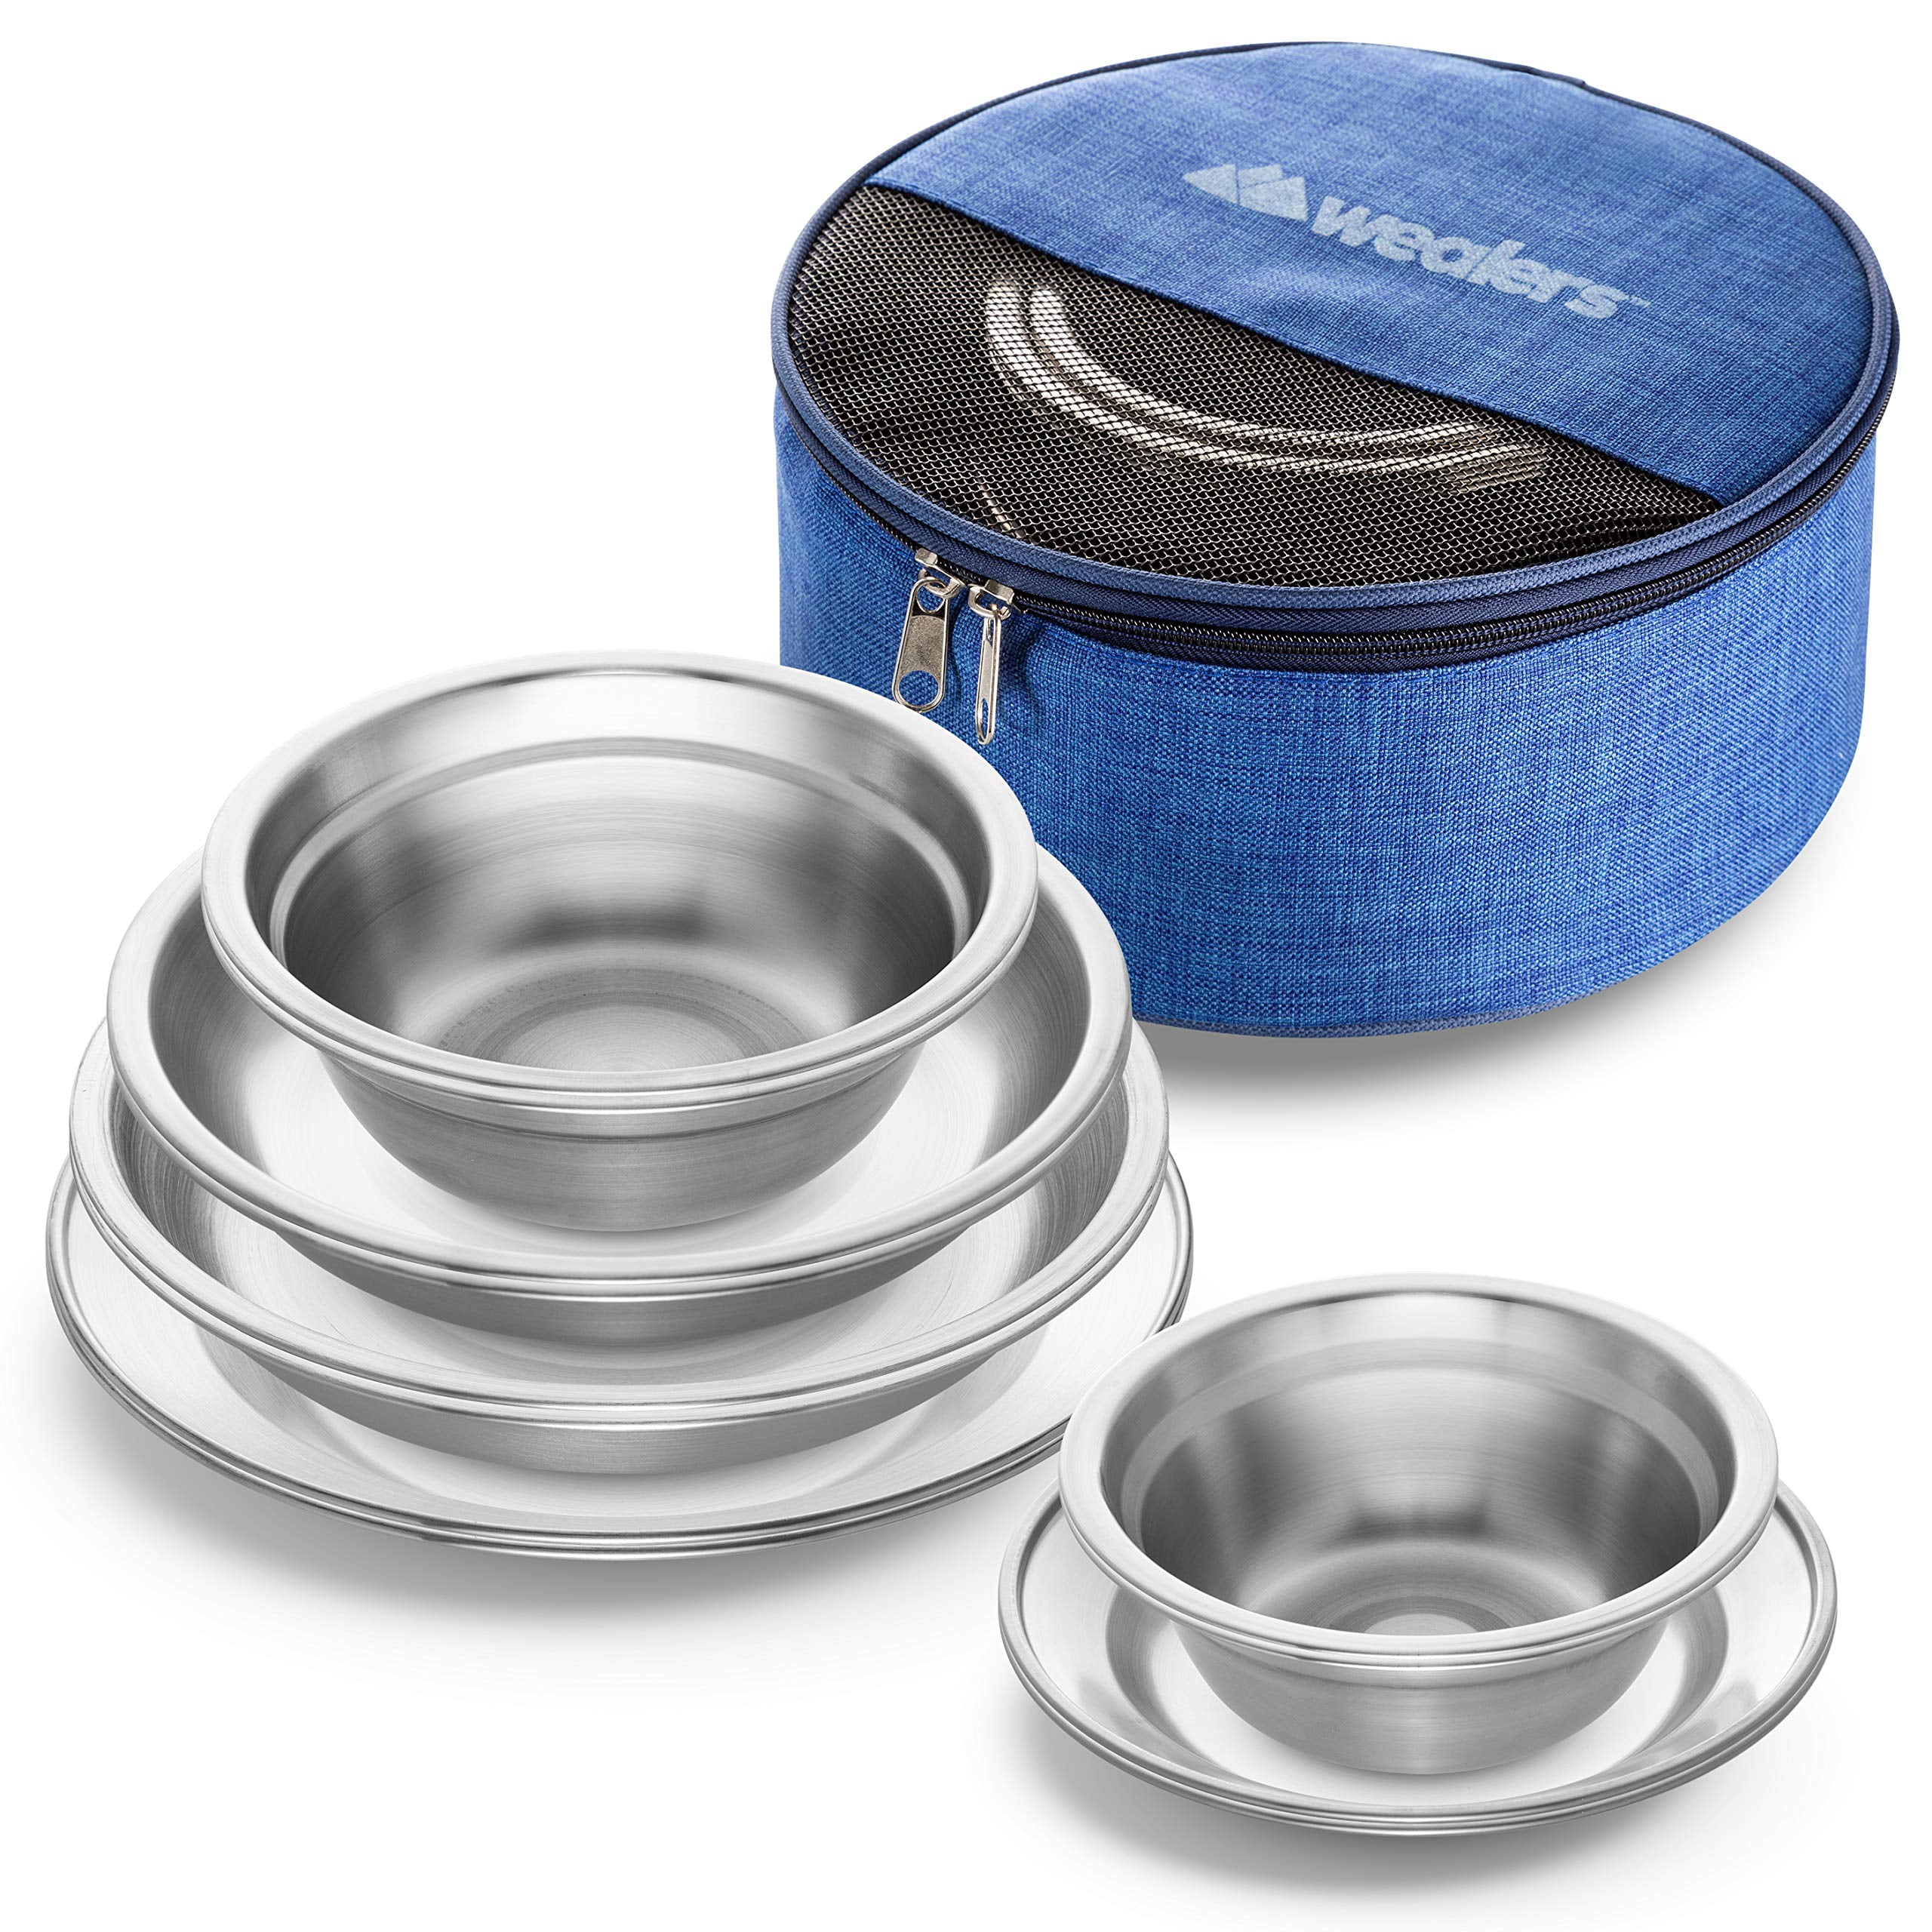 Stainless Steel Dinnerware Plates and Bowls Camping 12-Piece Kit Small Stainless Steel Camping Dish Set